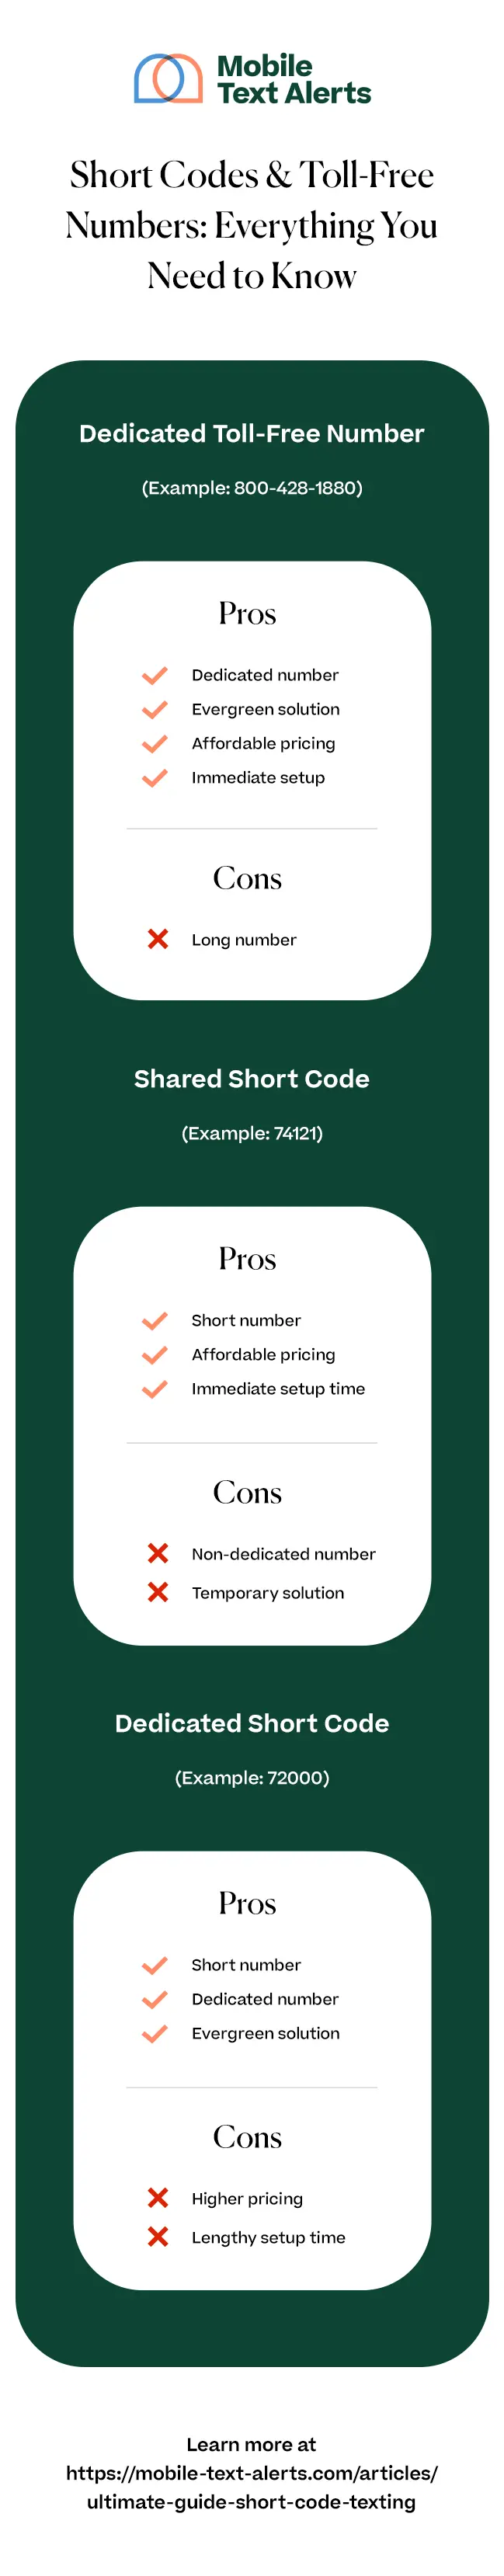 Short codes and Toll-free